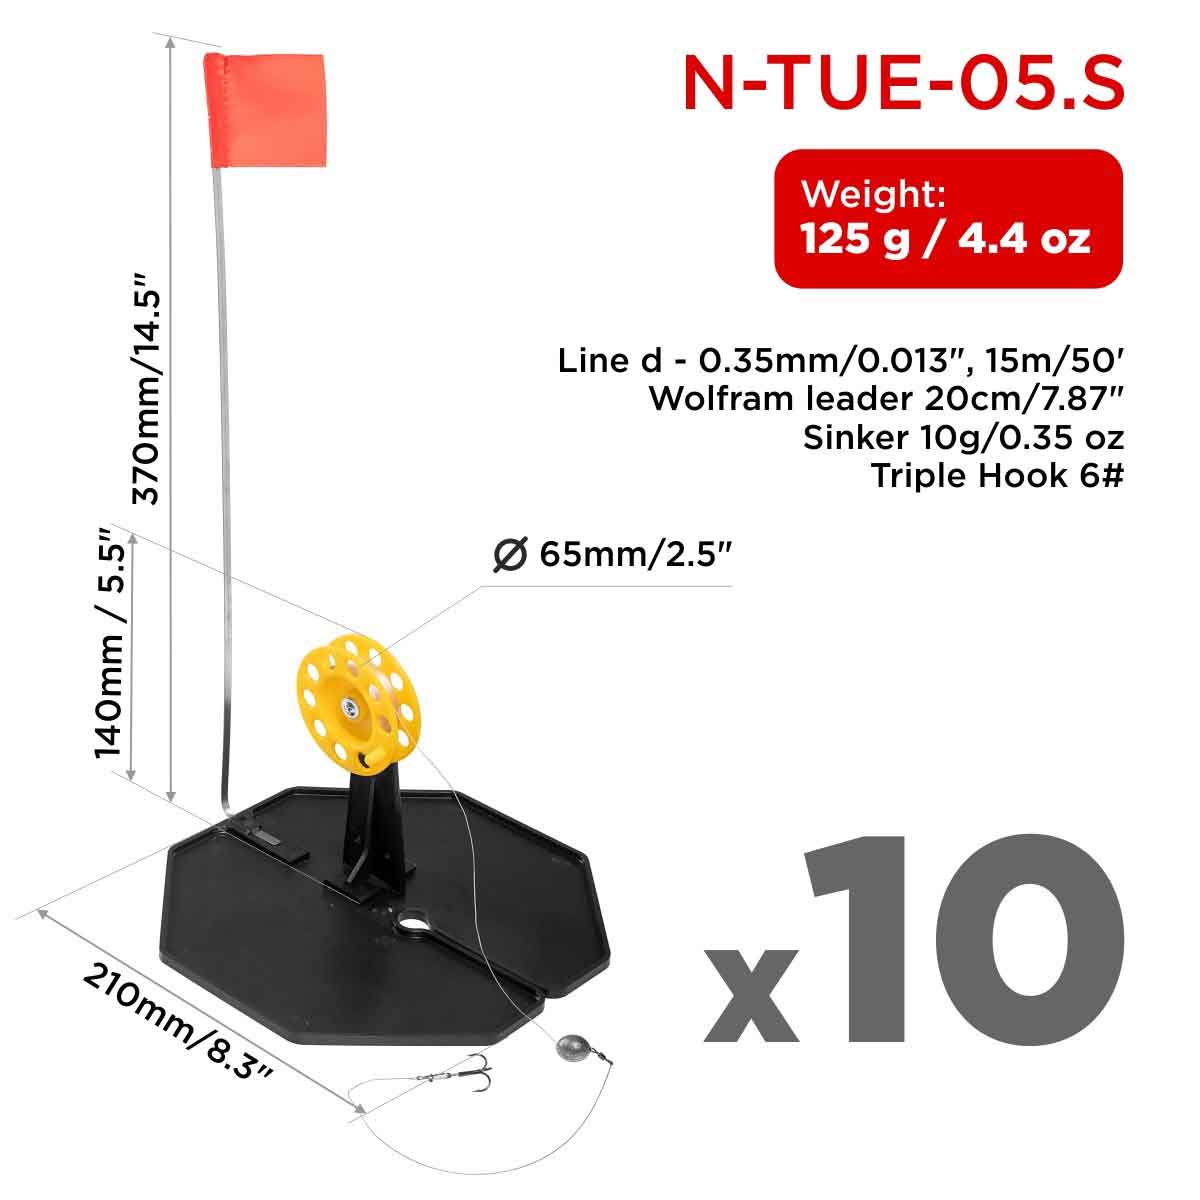 Set of 10 Equipped Tip-up Pop-Up Integrated Hole-Cover Easy to Clip N-TUE-05.S weighs 4.4 oz, the base is 8.3 inches long, the flag shaft is 14.5 inches, the spool diameter is 2.5 inches and its height is 5.5 inches. Each equipped with a 50 ft of 0.35mm fishing line, a 7.87 inches wolfram leader, a 0.35 oz sinker and a triple hook